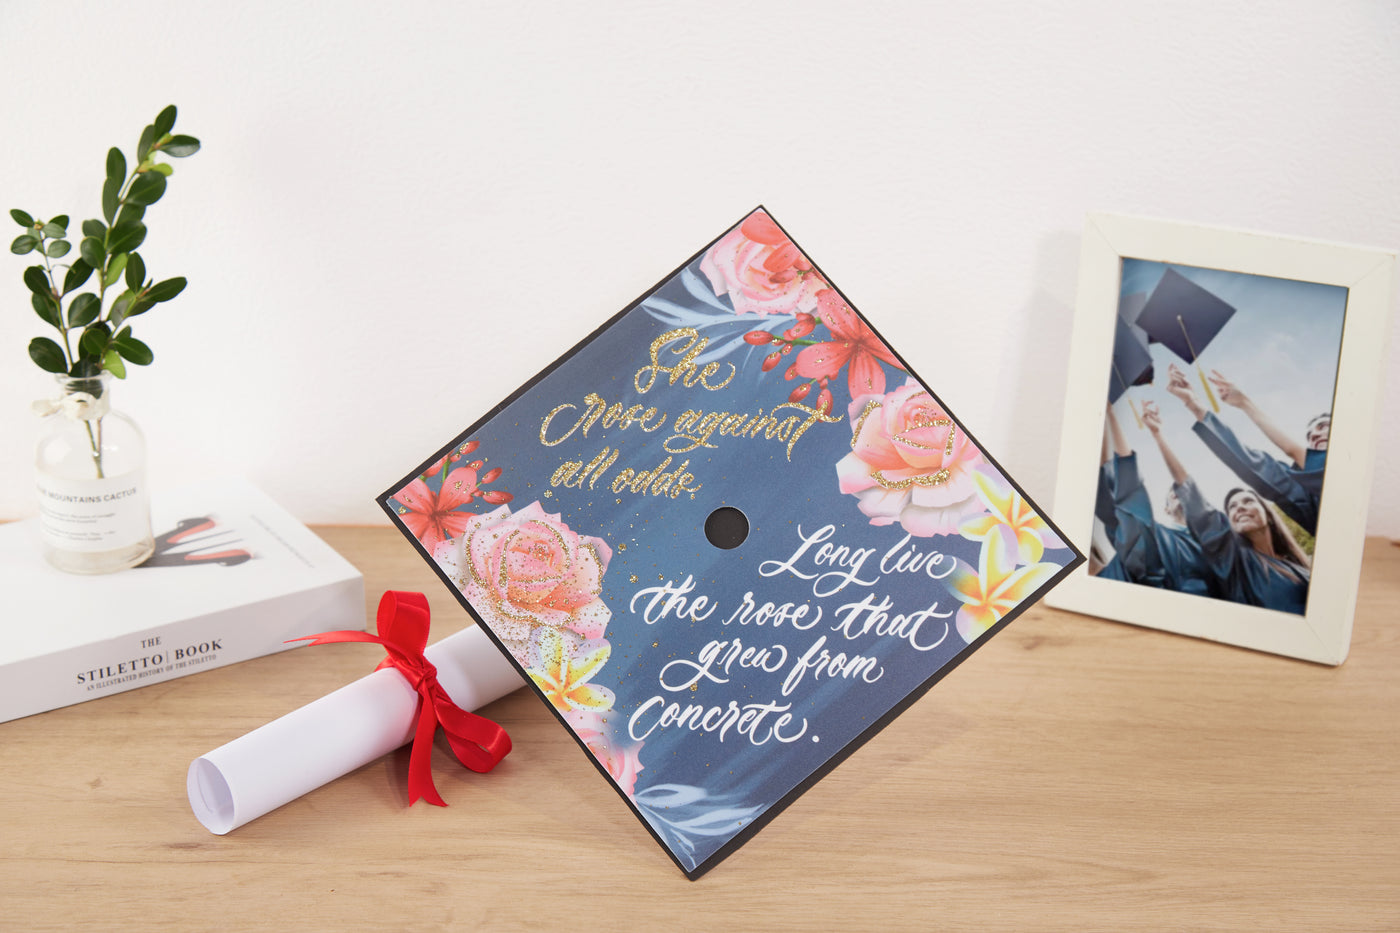 Graduation cap topper art print, She goes against all odds long live the rose that grew from concrete